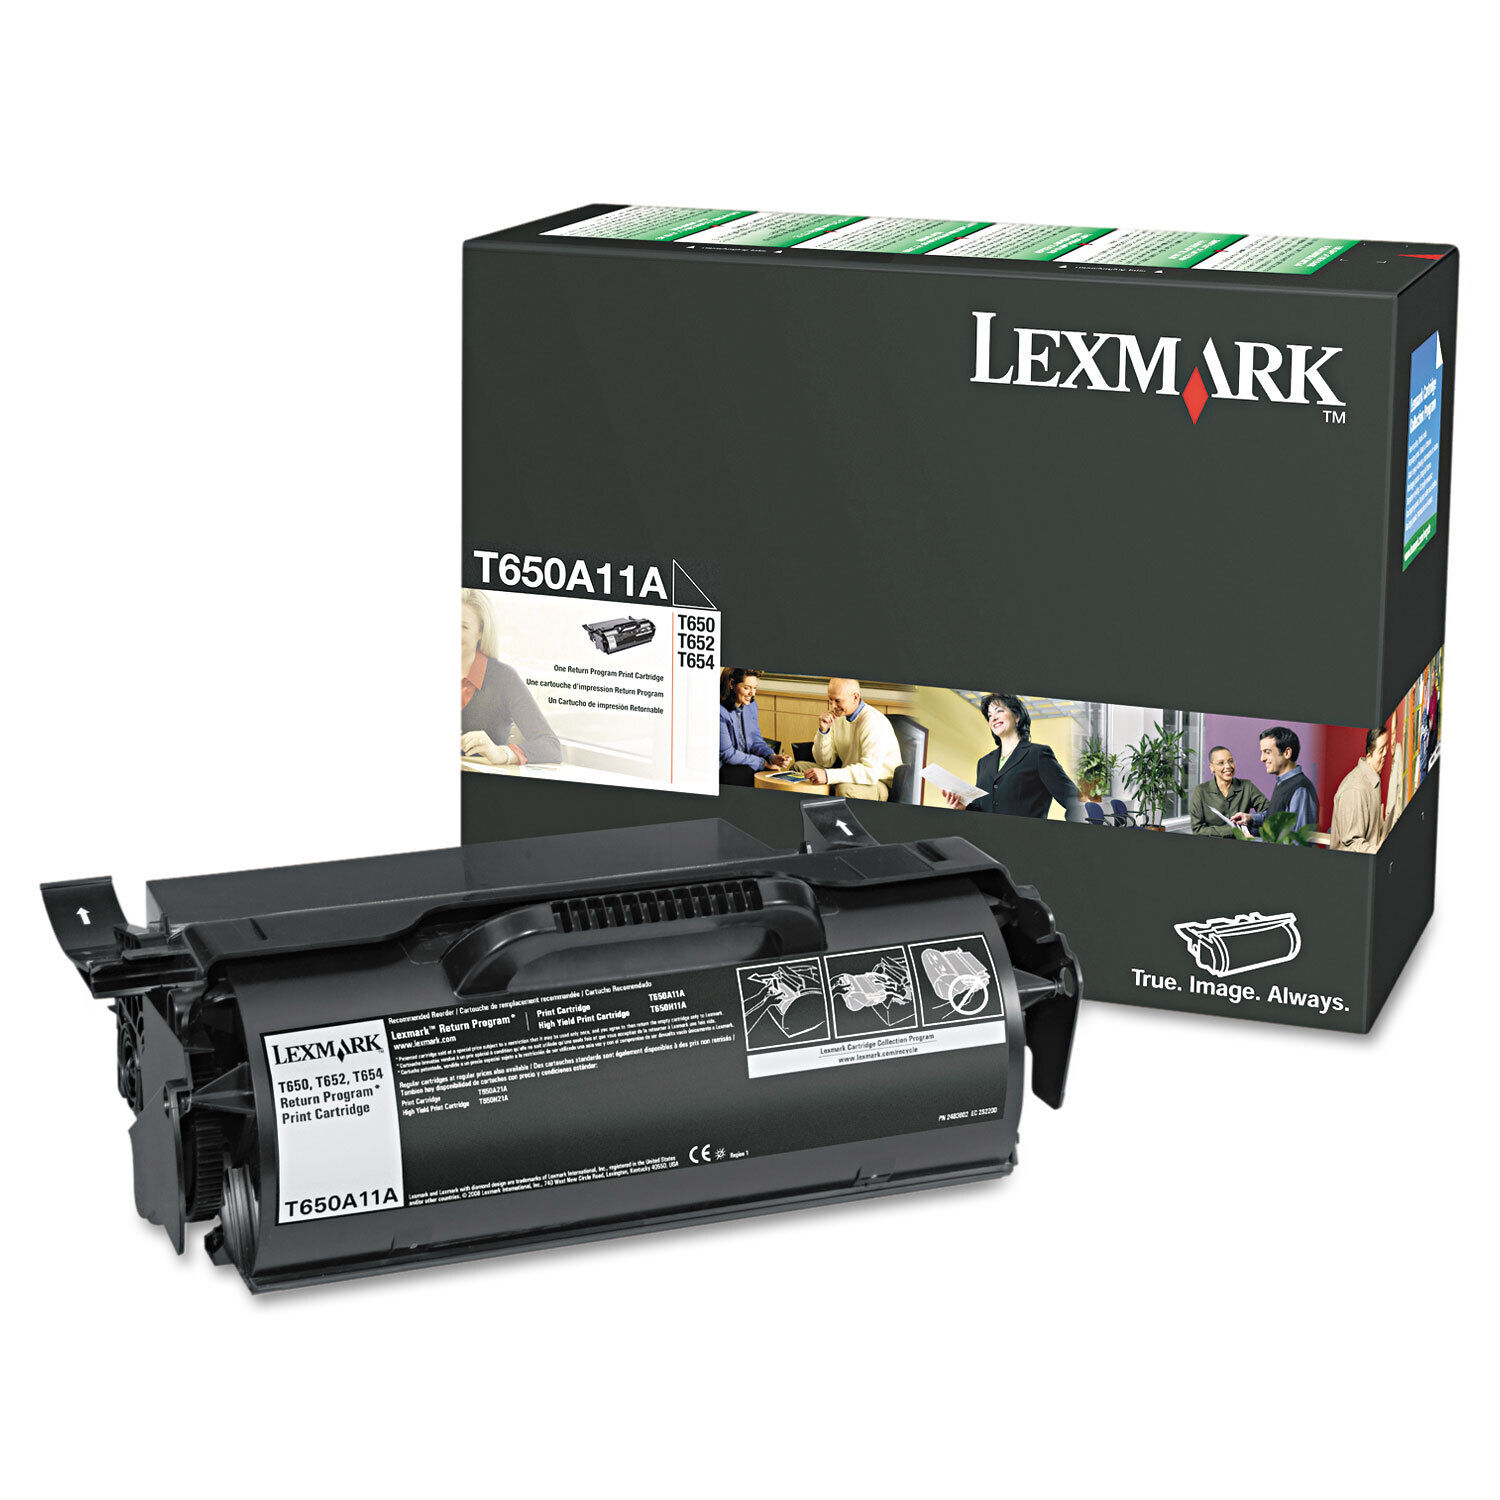 Lexmark T650A11A Toner 7000 Page-Yield Black